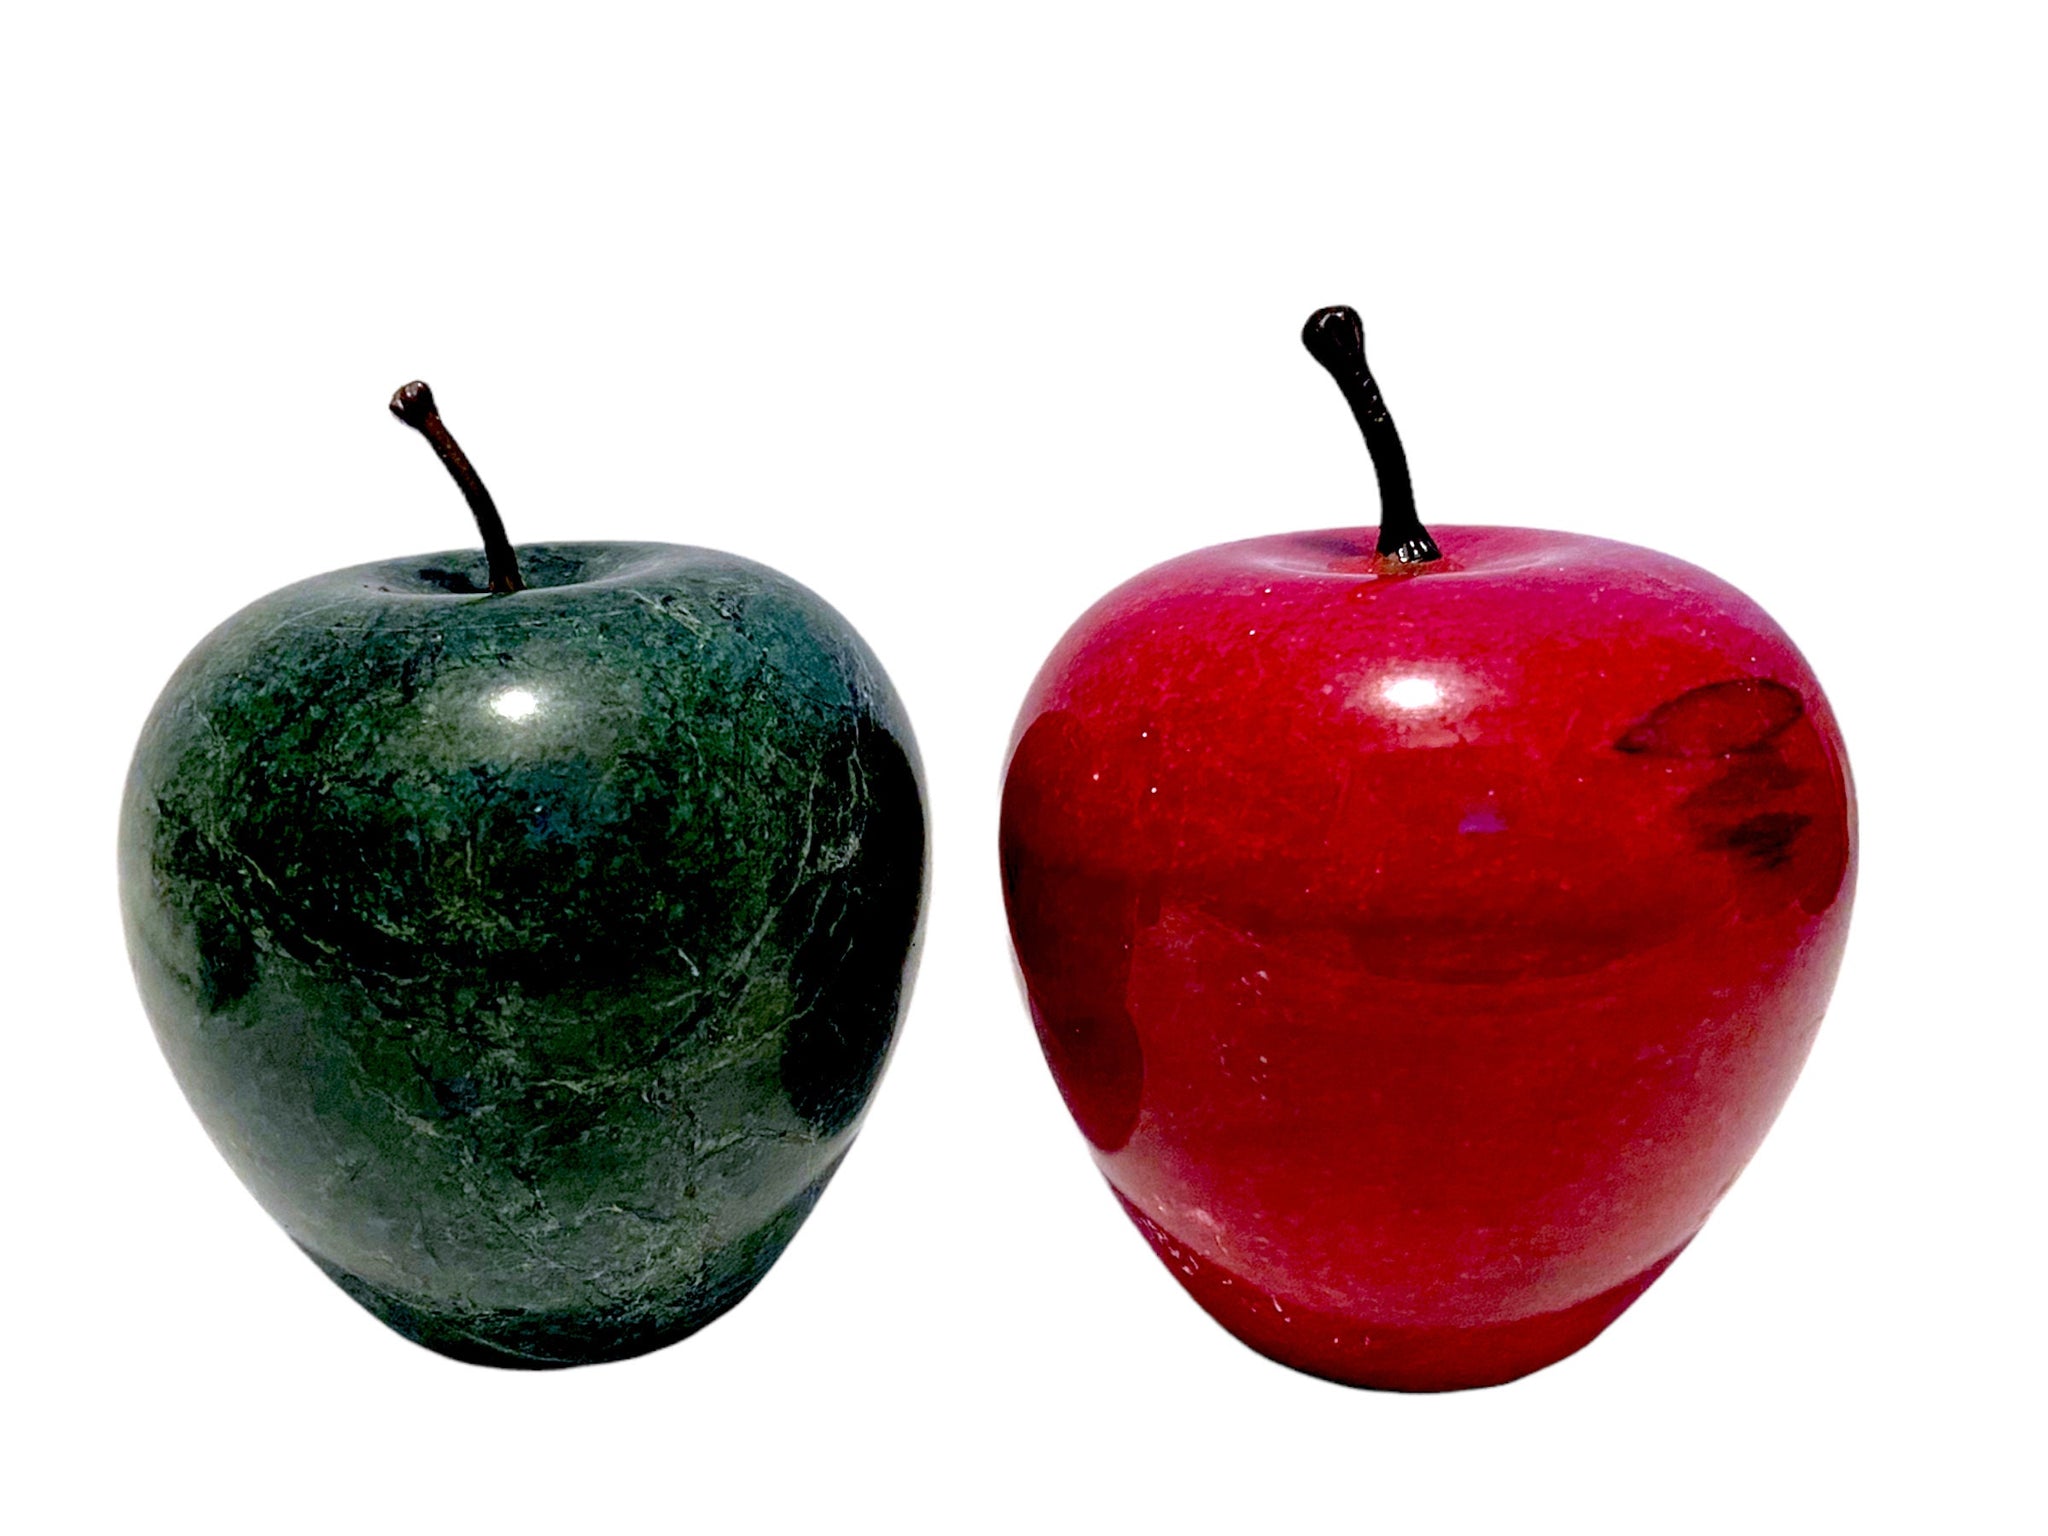 Vintage Red and Green Marble Apples - Set of 2